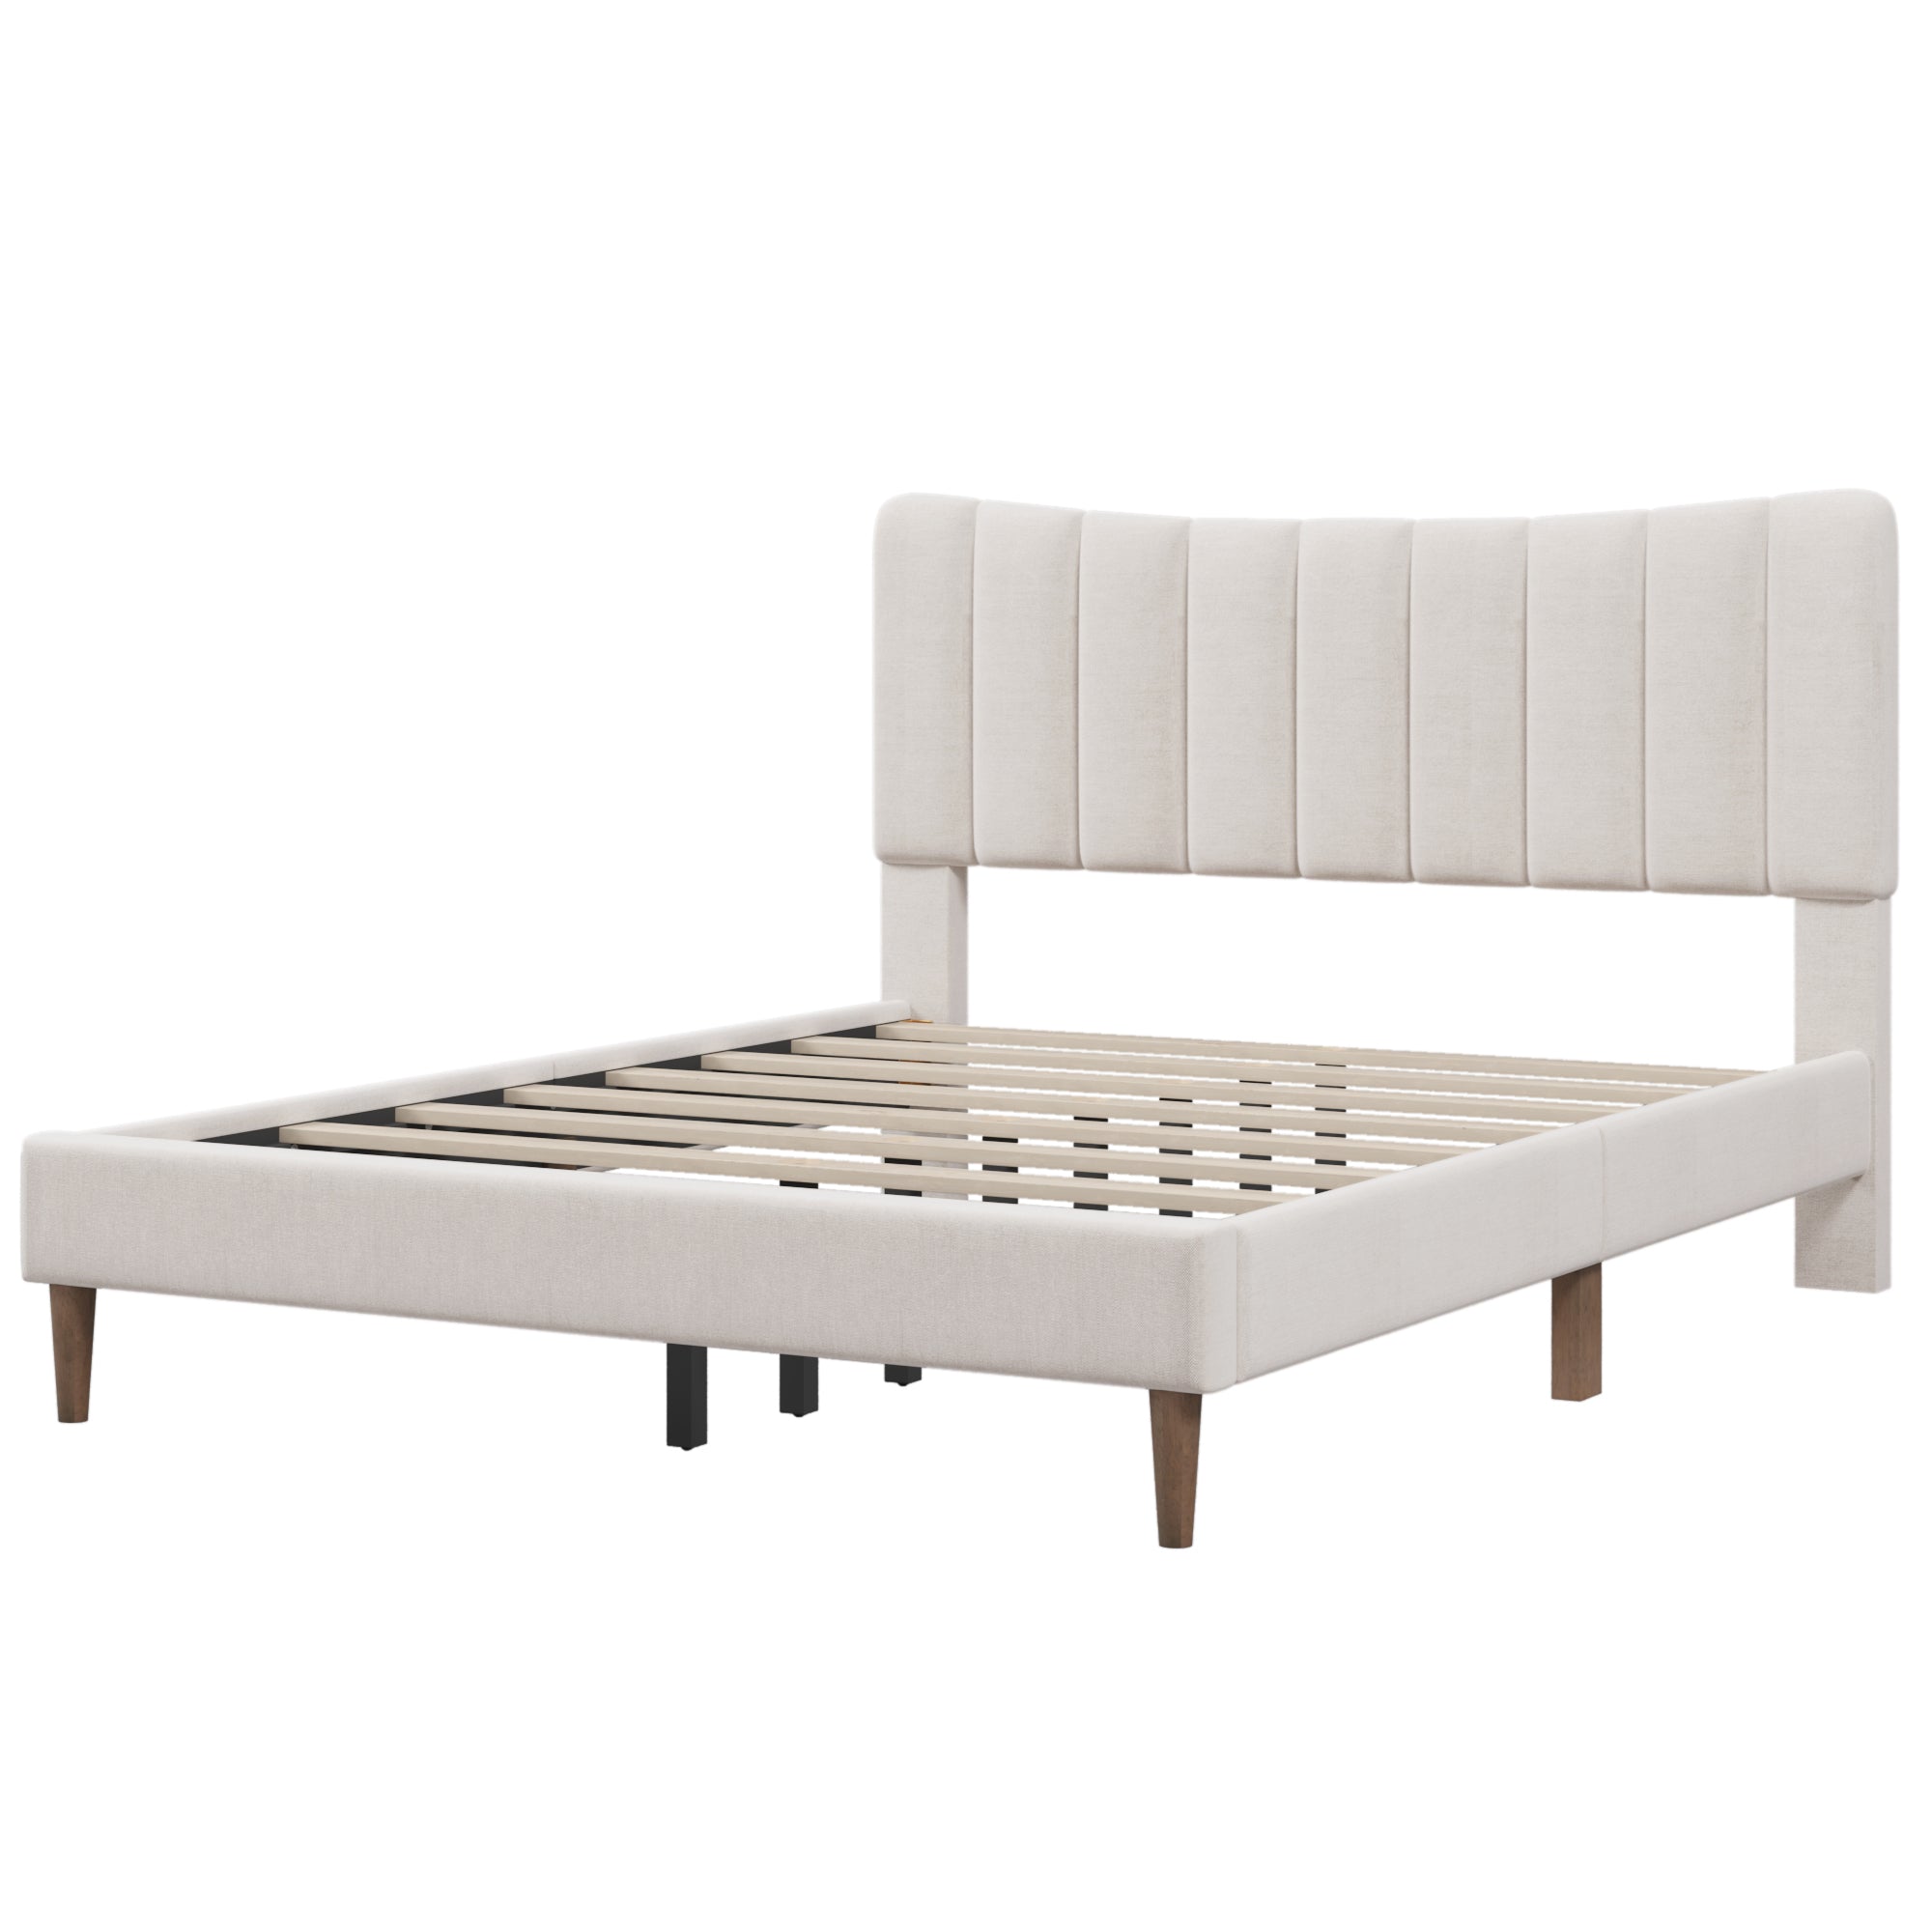 Upholstered Vertical Tufted bed Frame with Tufted Headboard By: Alabama Beds